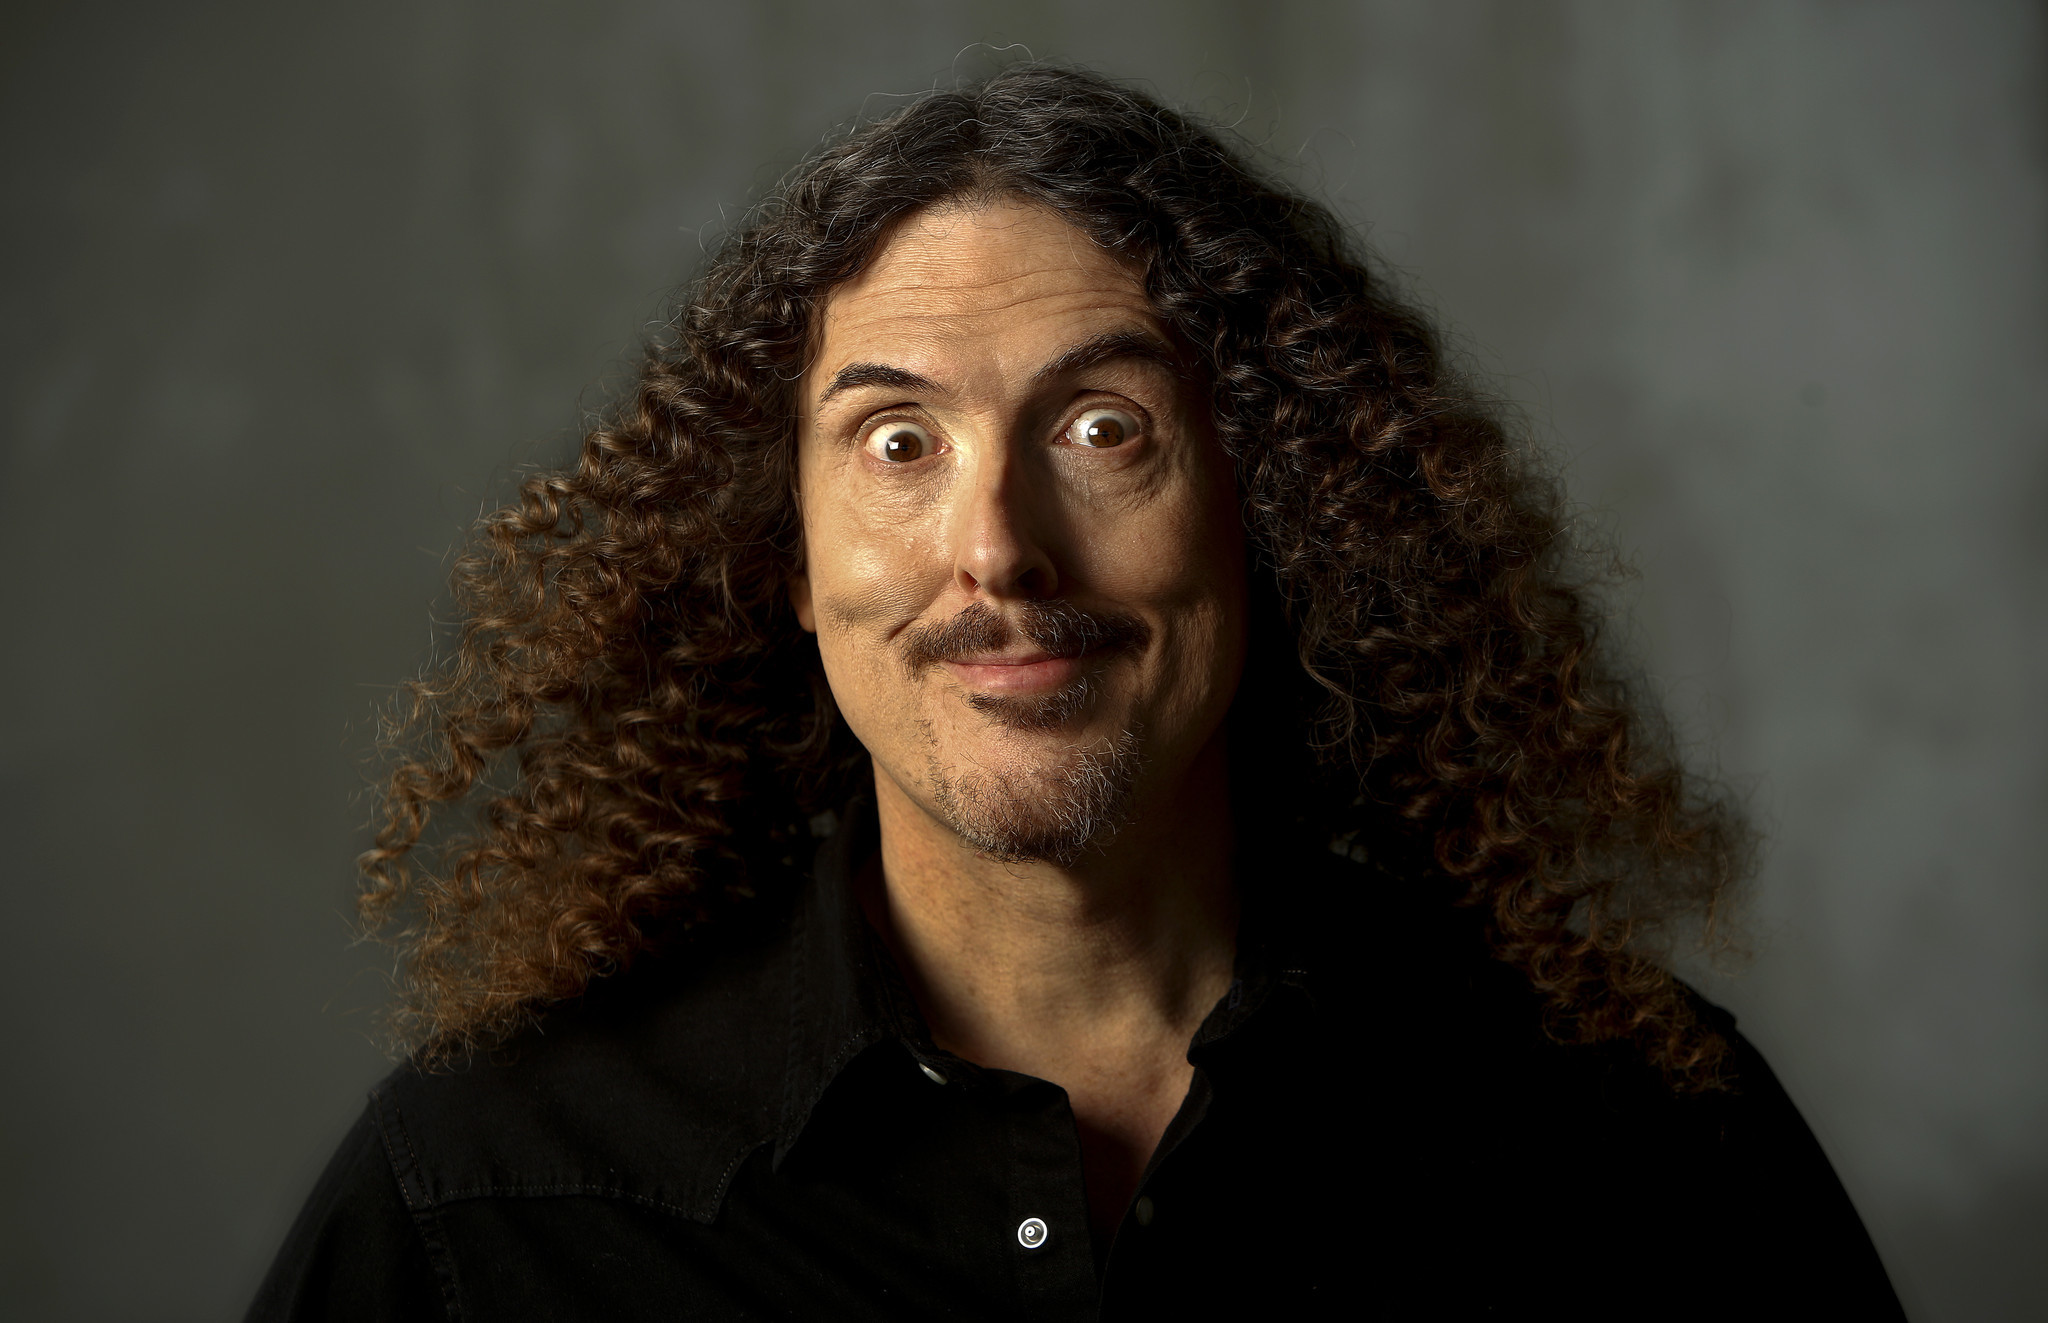 Weird Al Yankovic, young people with autism sing 'Yoda' on telethon - LA Times2048 x 1323